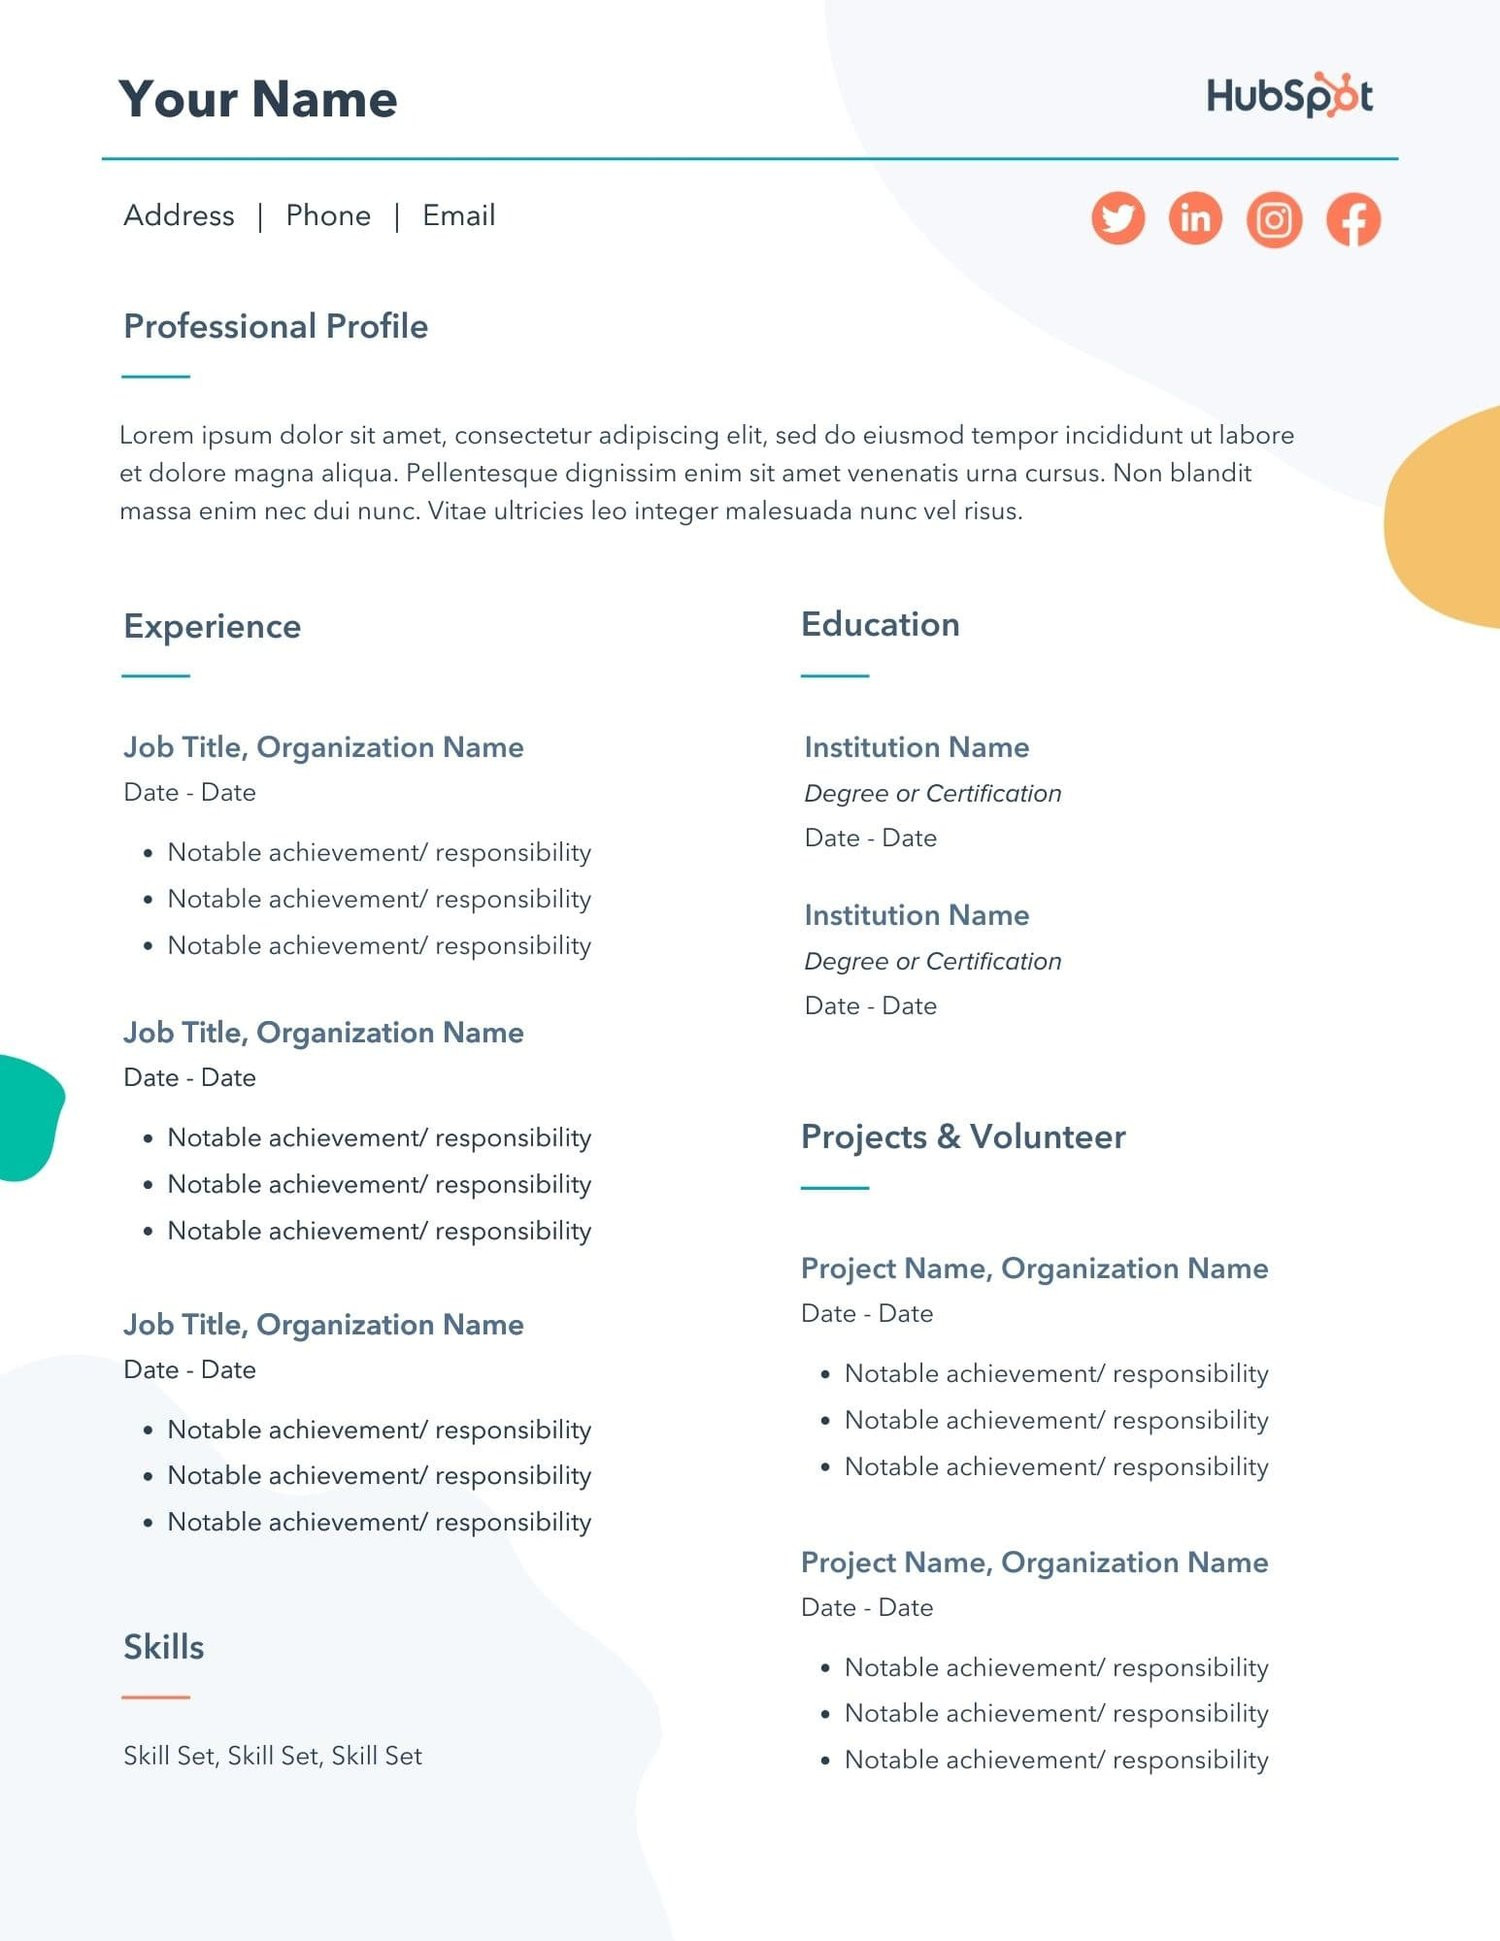 Resume Samples that Can Be Edited 29 Free Resume Templates for Microsoft Word (& How to Make Your Own)